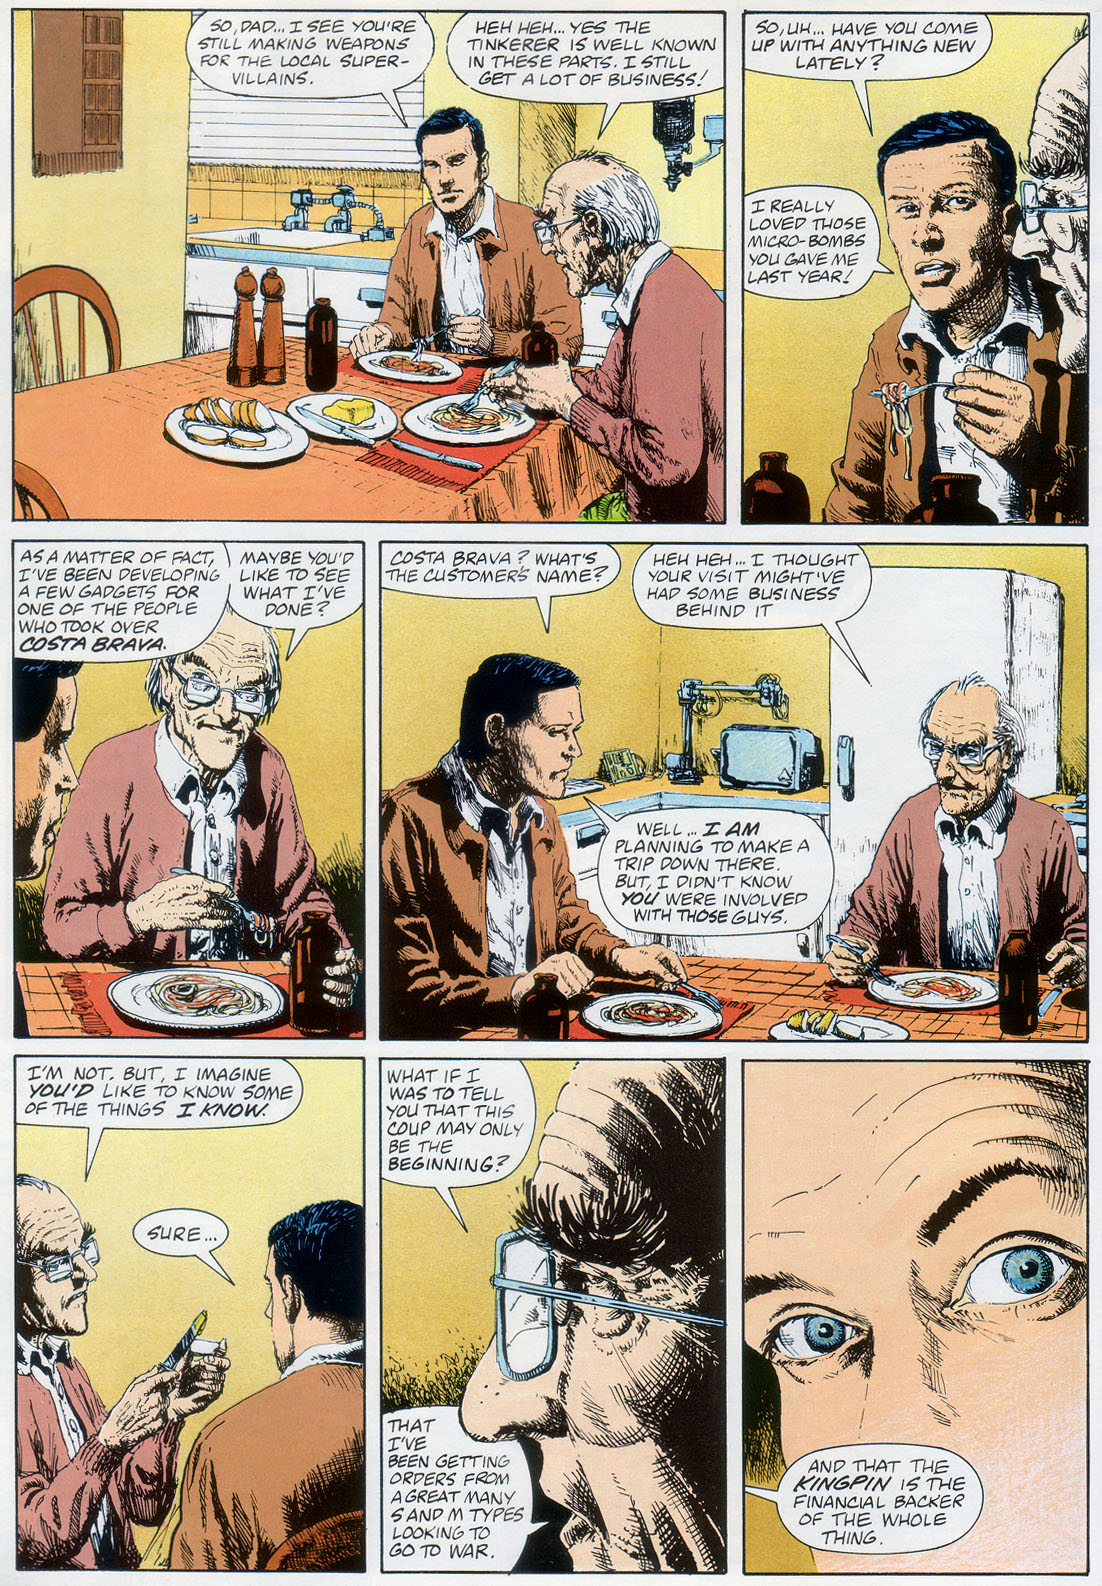 Marvel Graphic Novel issue 57 - Rick Mason - The Agent - Page 32